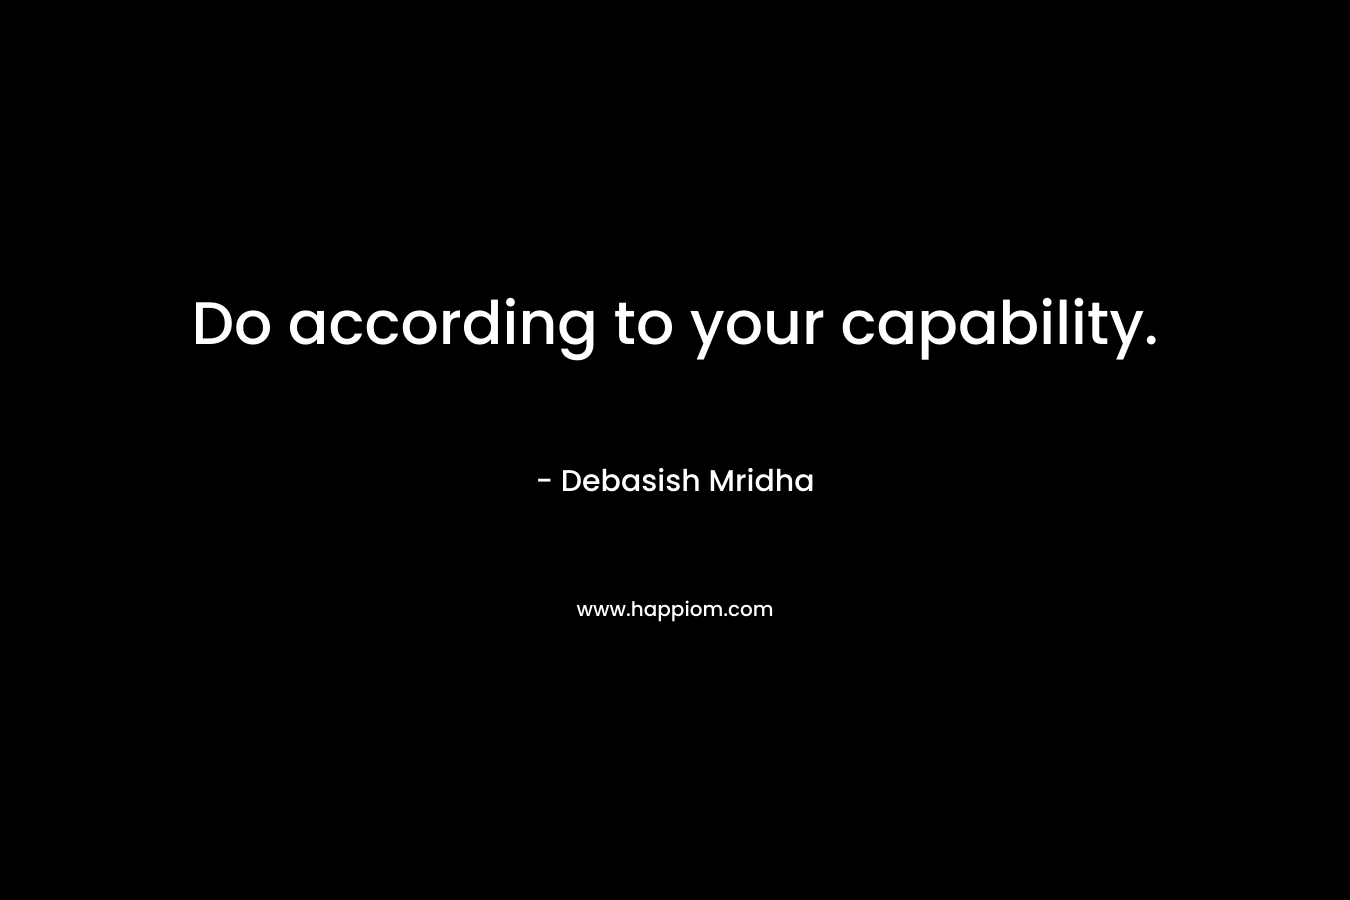 Do according to your capability.